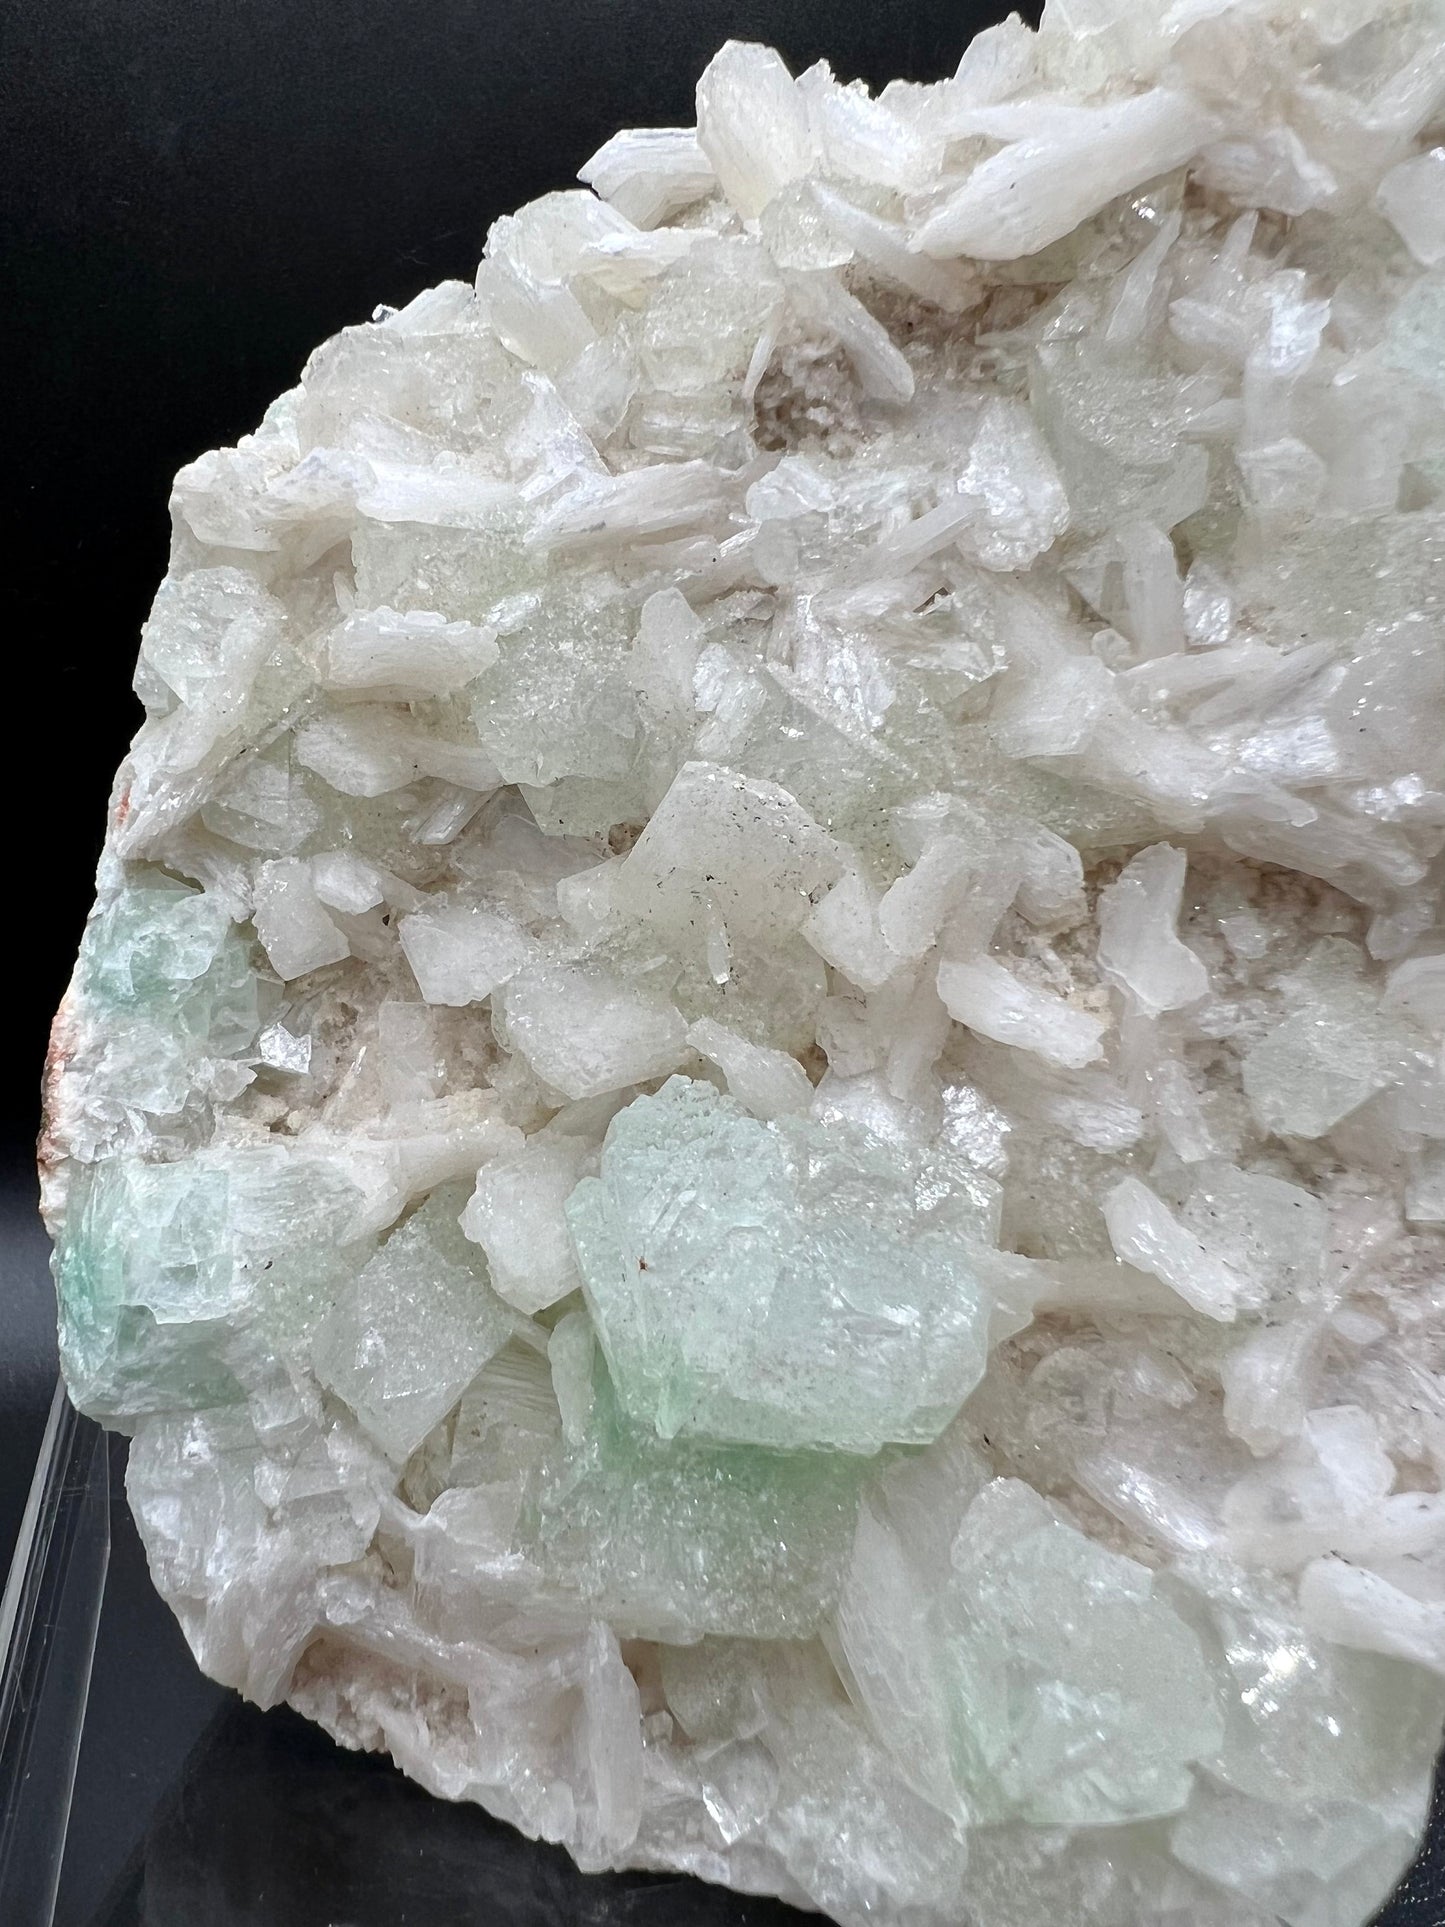 Large Green And Clear Apophyllite Specimen. Over 2.3 lbs. Awesome Display Piece.